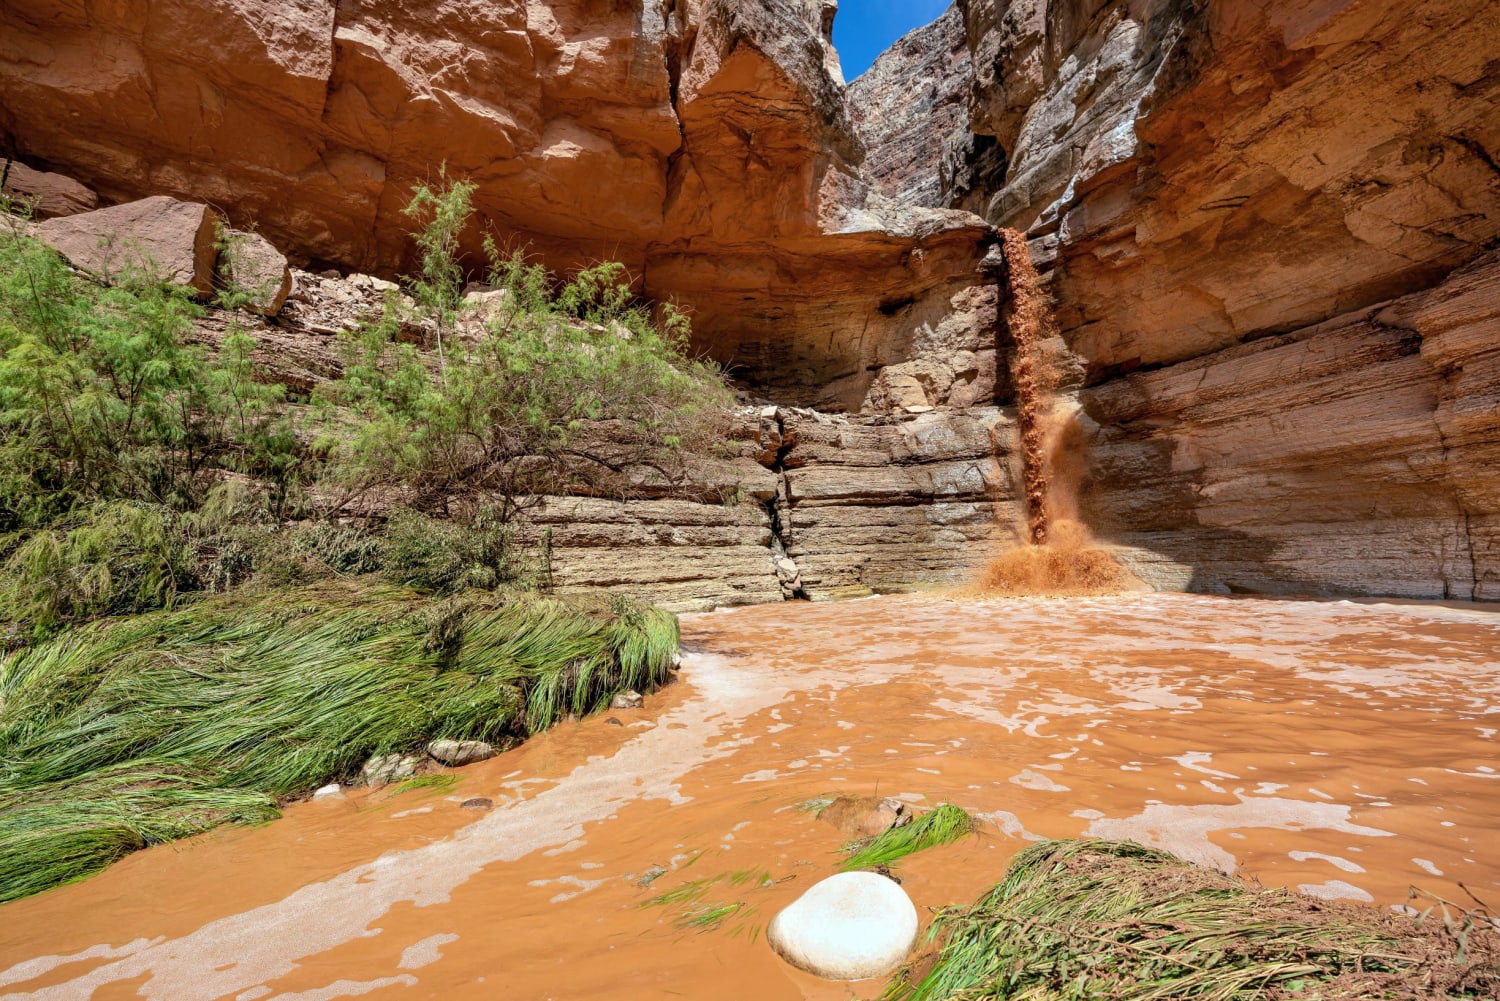 Michigan Woman Dies After Flash Flood in Grand Canyon